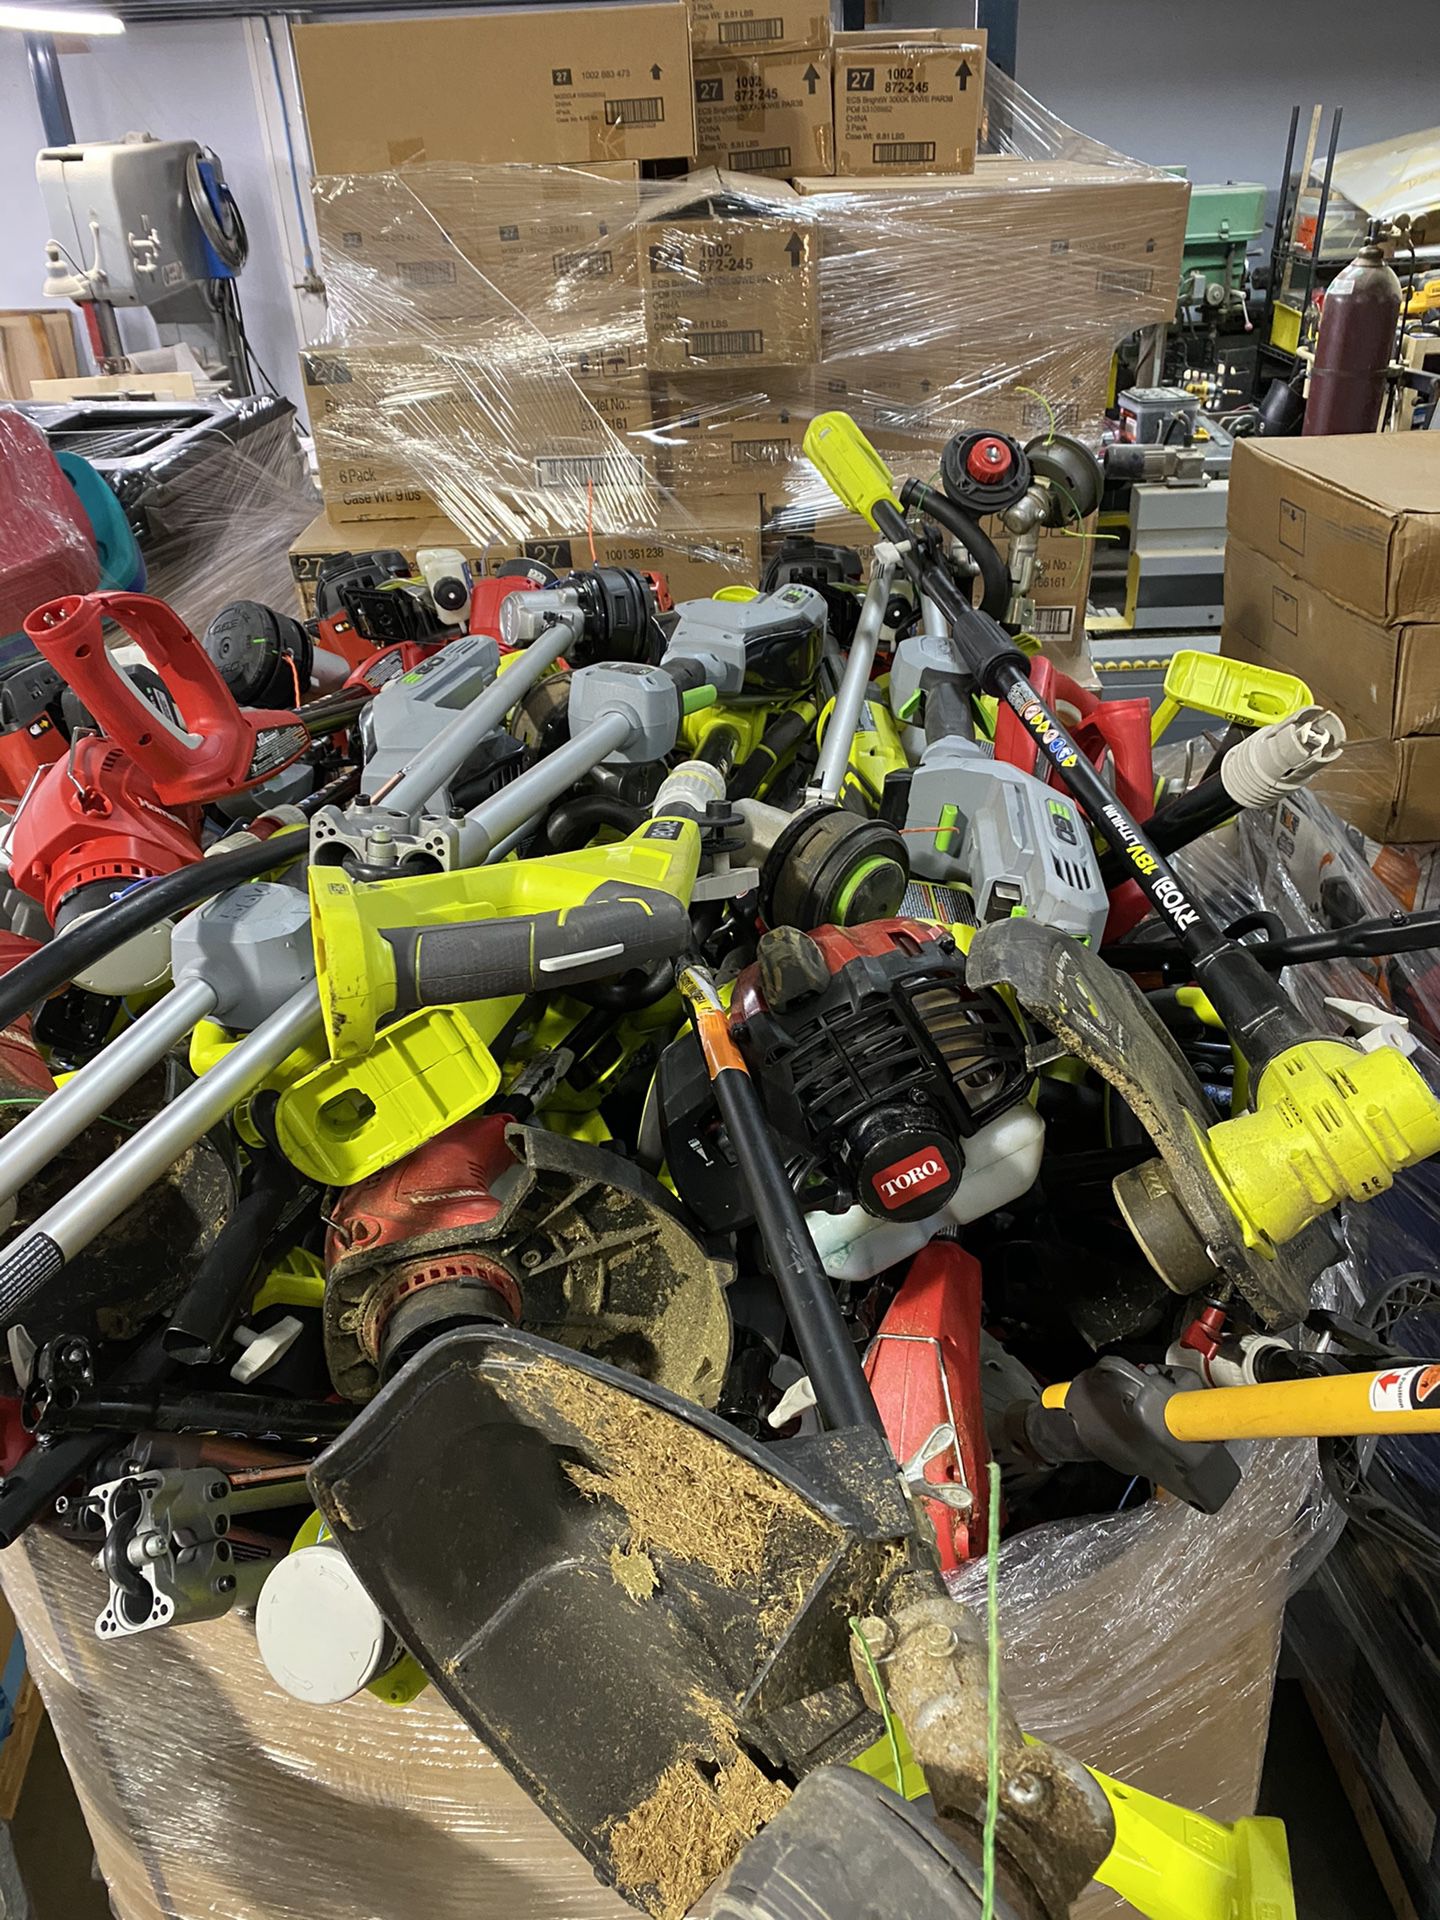 74 Dewalt, Toro, Ryobi and Ego Weed Eaters, Chainsaws, Trimmers and Blowers! No Batteries. Huge Pallet! Excellent Condition!